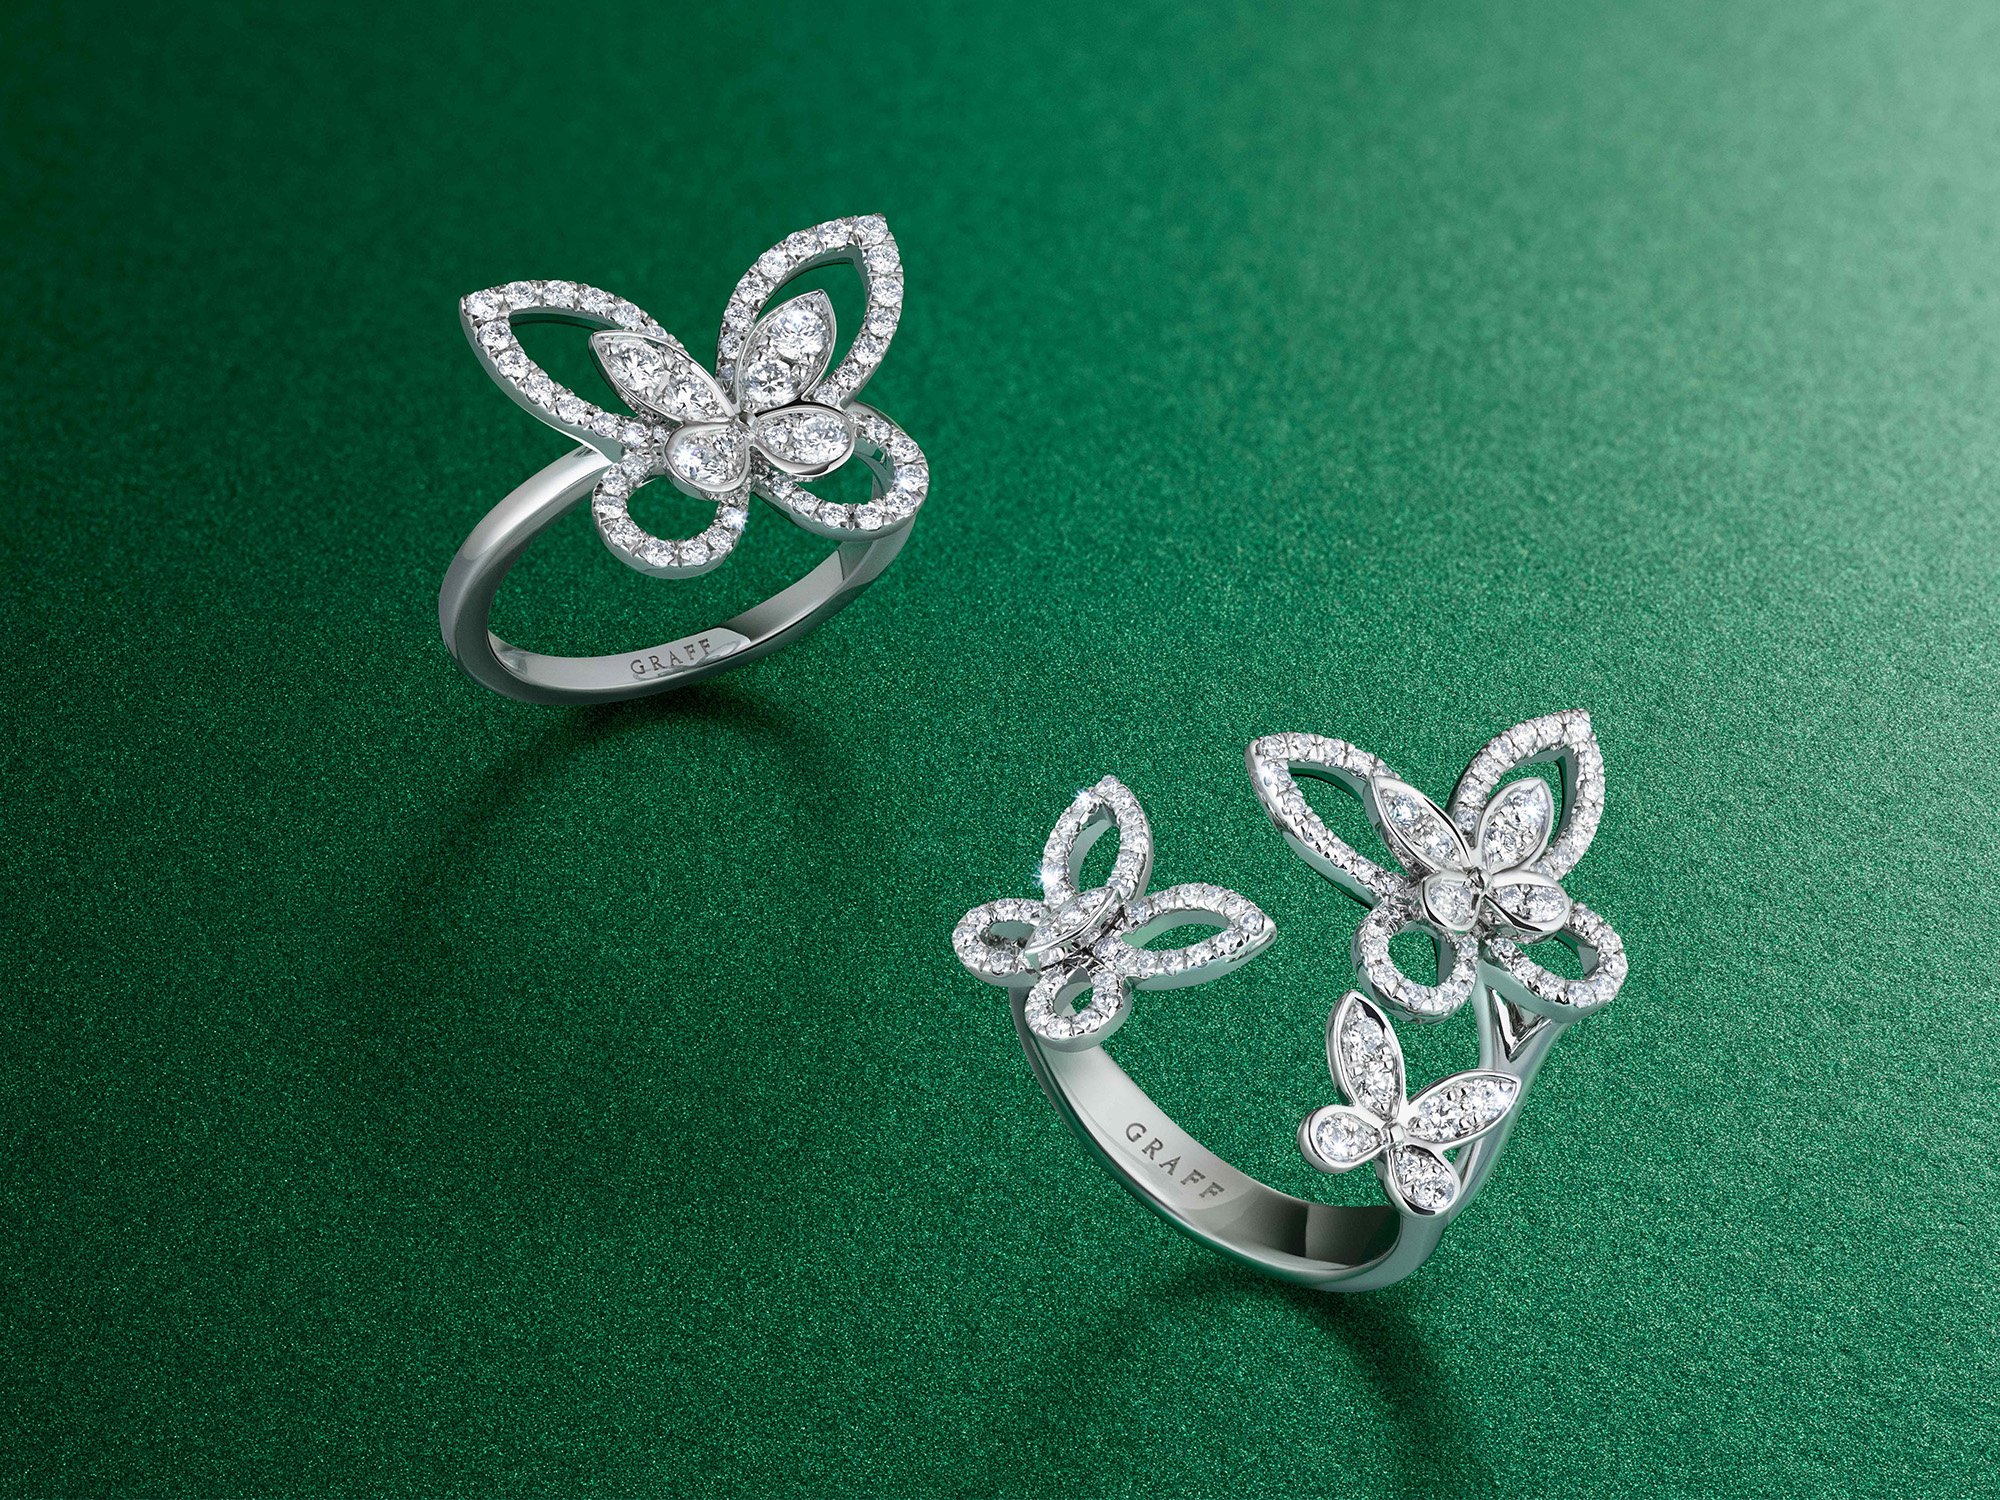 Double Butterfly Silhouette Diamond Ring and Triple Butterfly Silhouette Diamond Ring from the Graff jewellery collection.